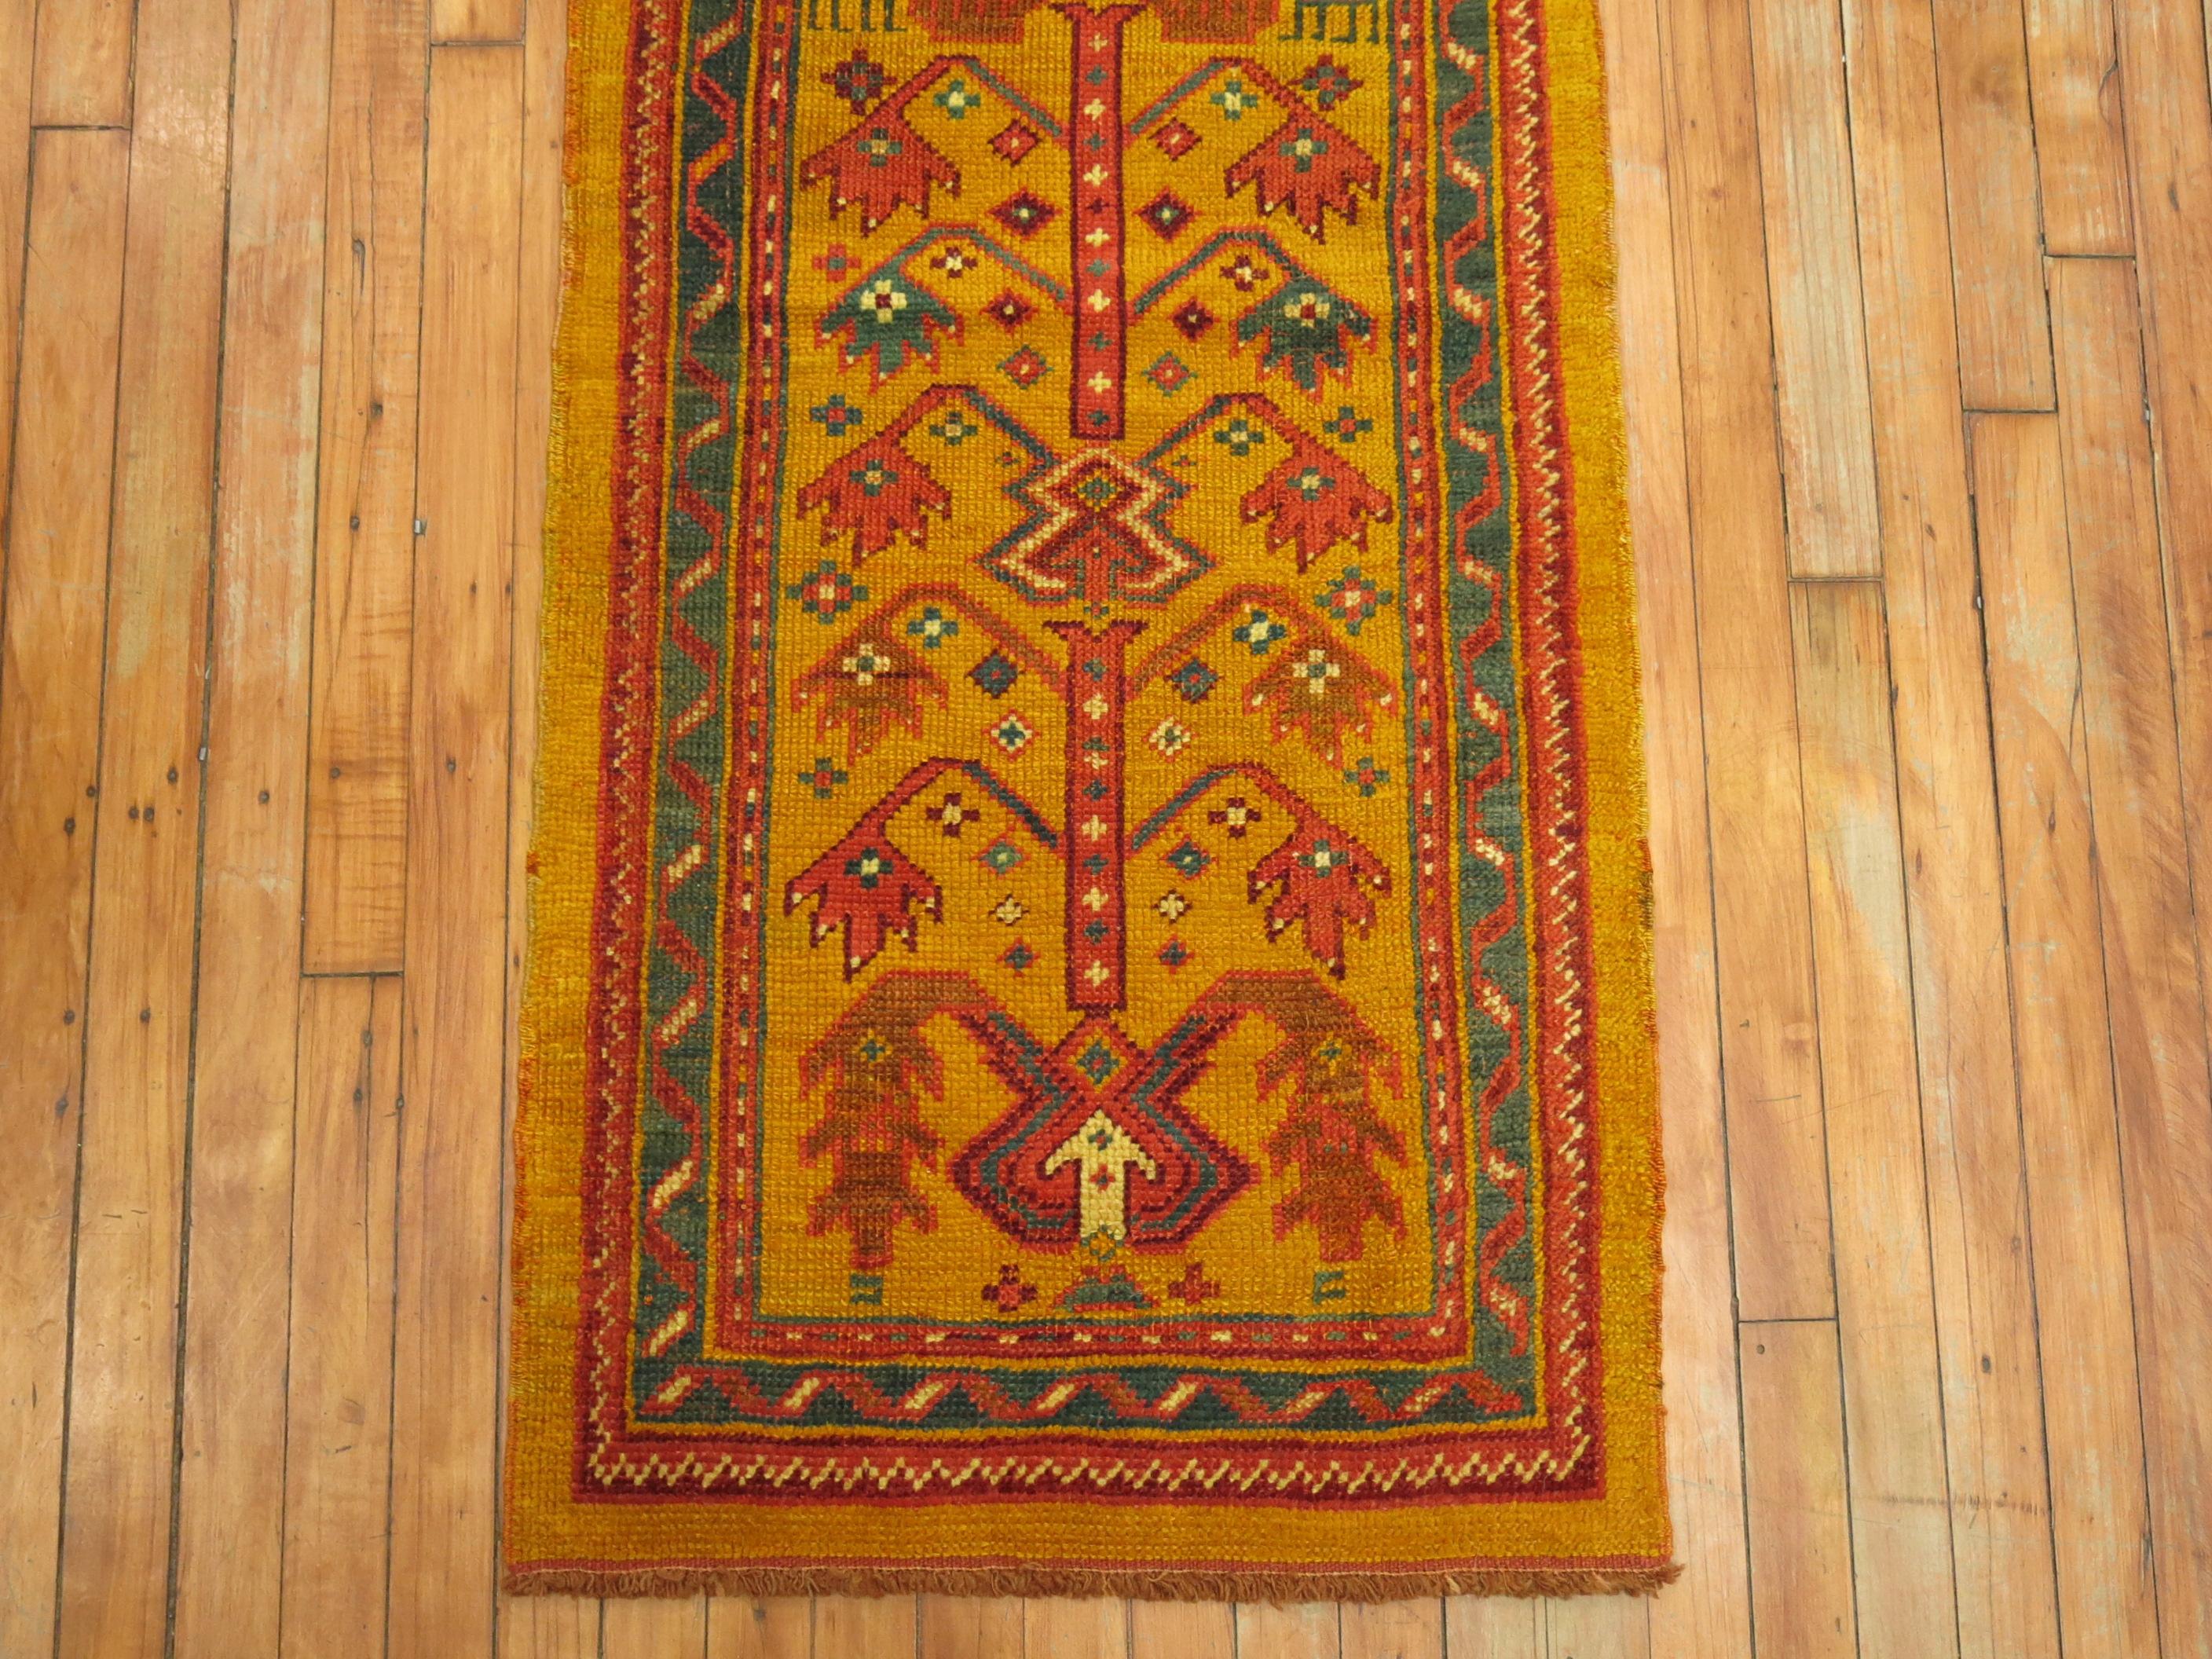 An authentic narrow one of a kind antique Turkish Oushak runner. The size is original and was originally woven in the 19th century for a narrow hallway in a central park west apartment.